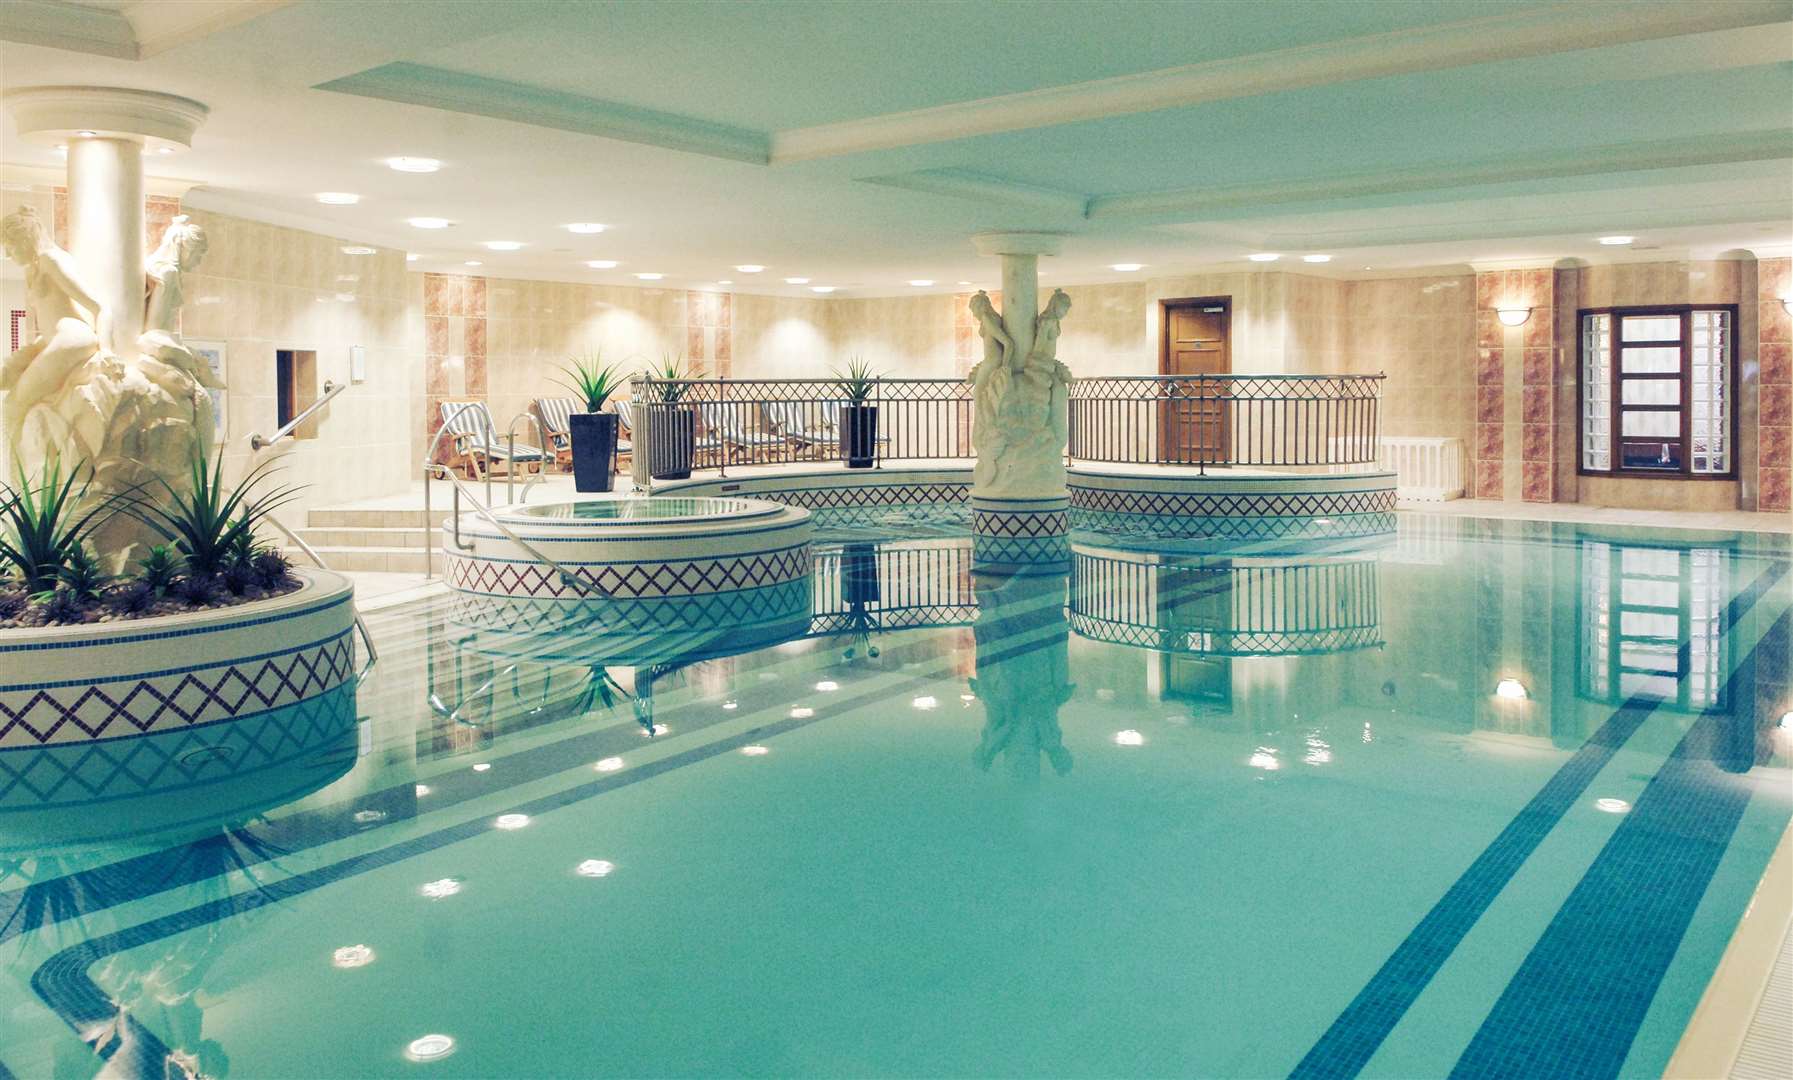 After an action-packed day at Brands Hatch, you can come back to the spa at Mercure and put your feet up. Picture: Blueprintx